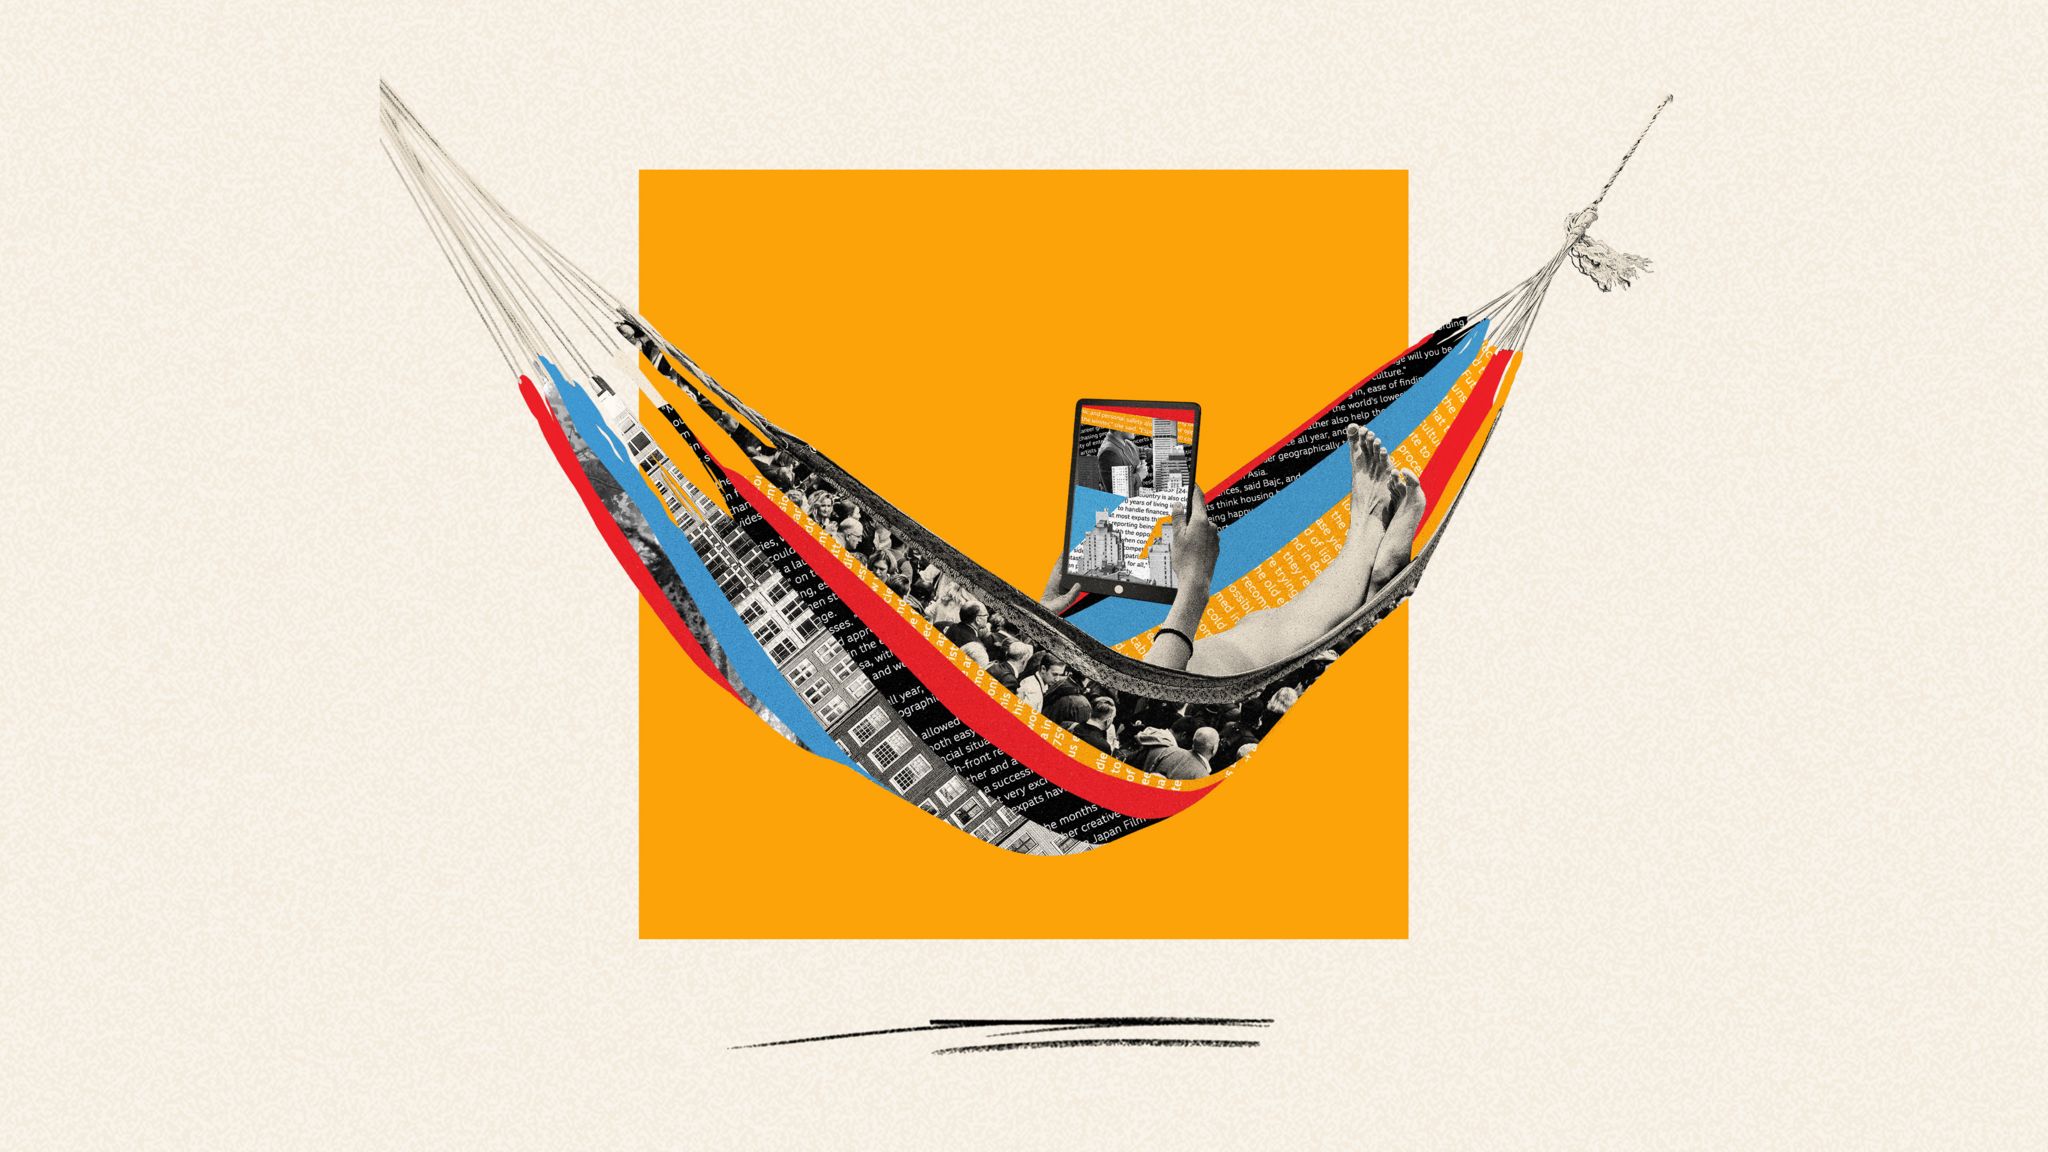 Illustration - in black, blue and red, against a yellow backdrop - depicting someone lying in a hammock, reading a newsletter on a tablet computer